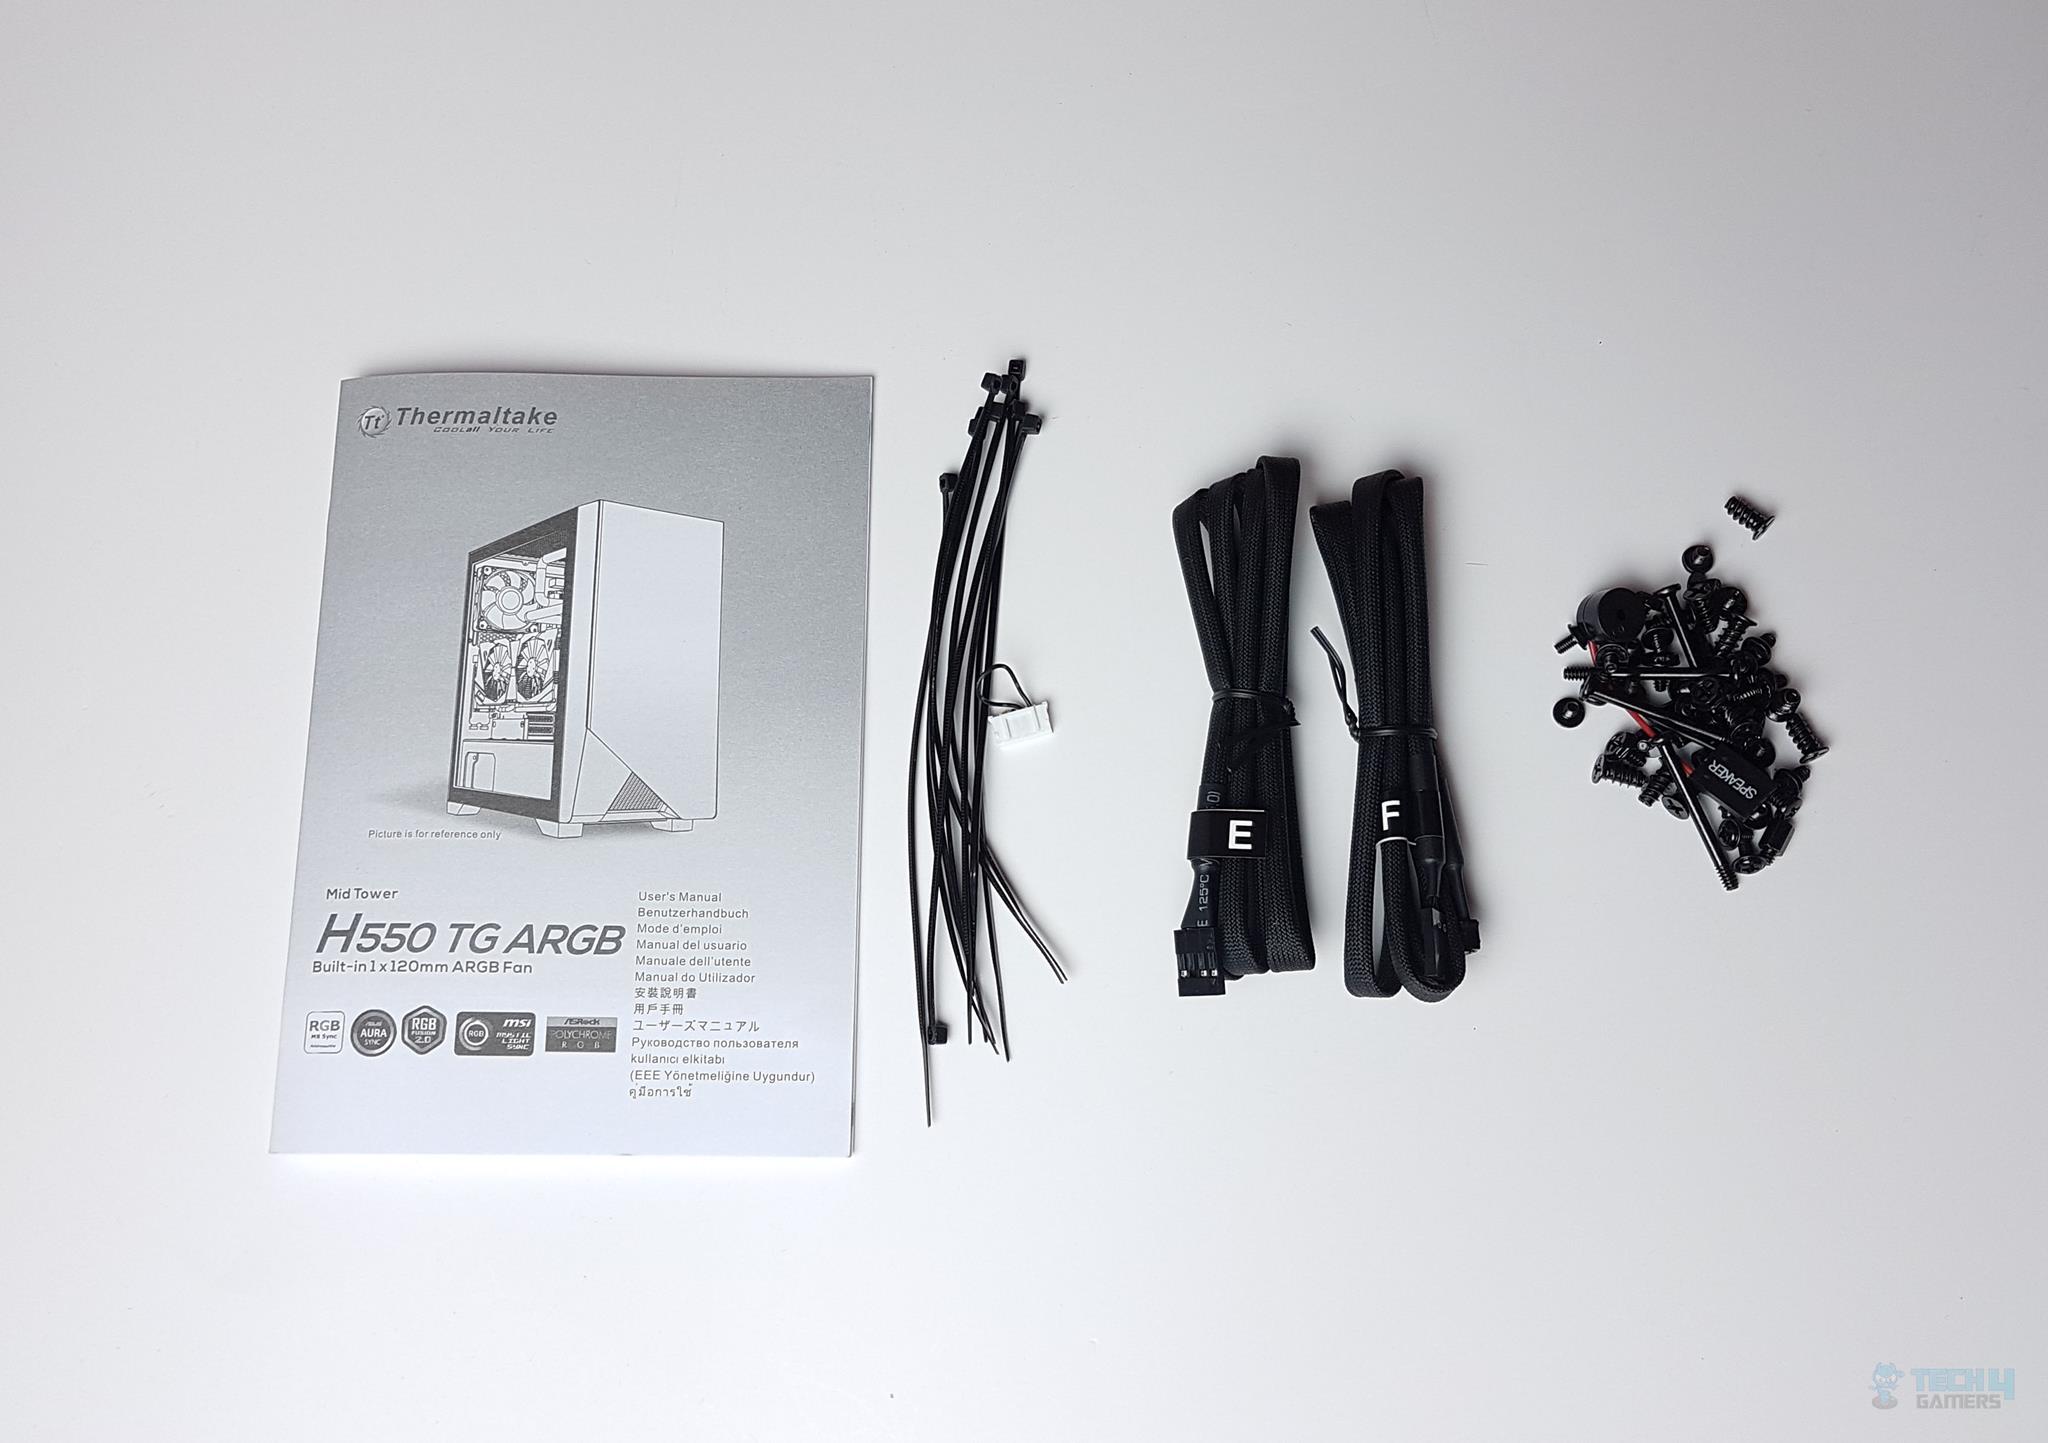 Hw h550 review contents